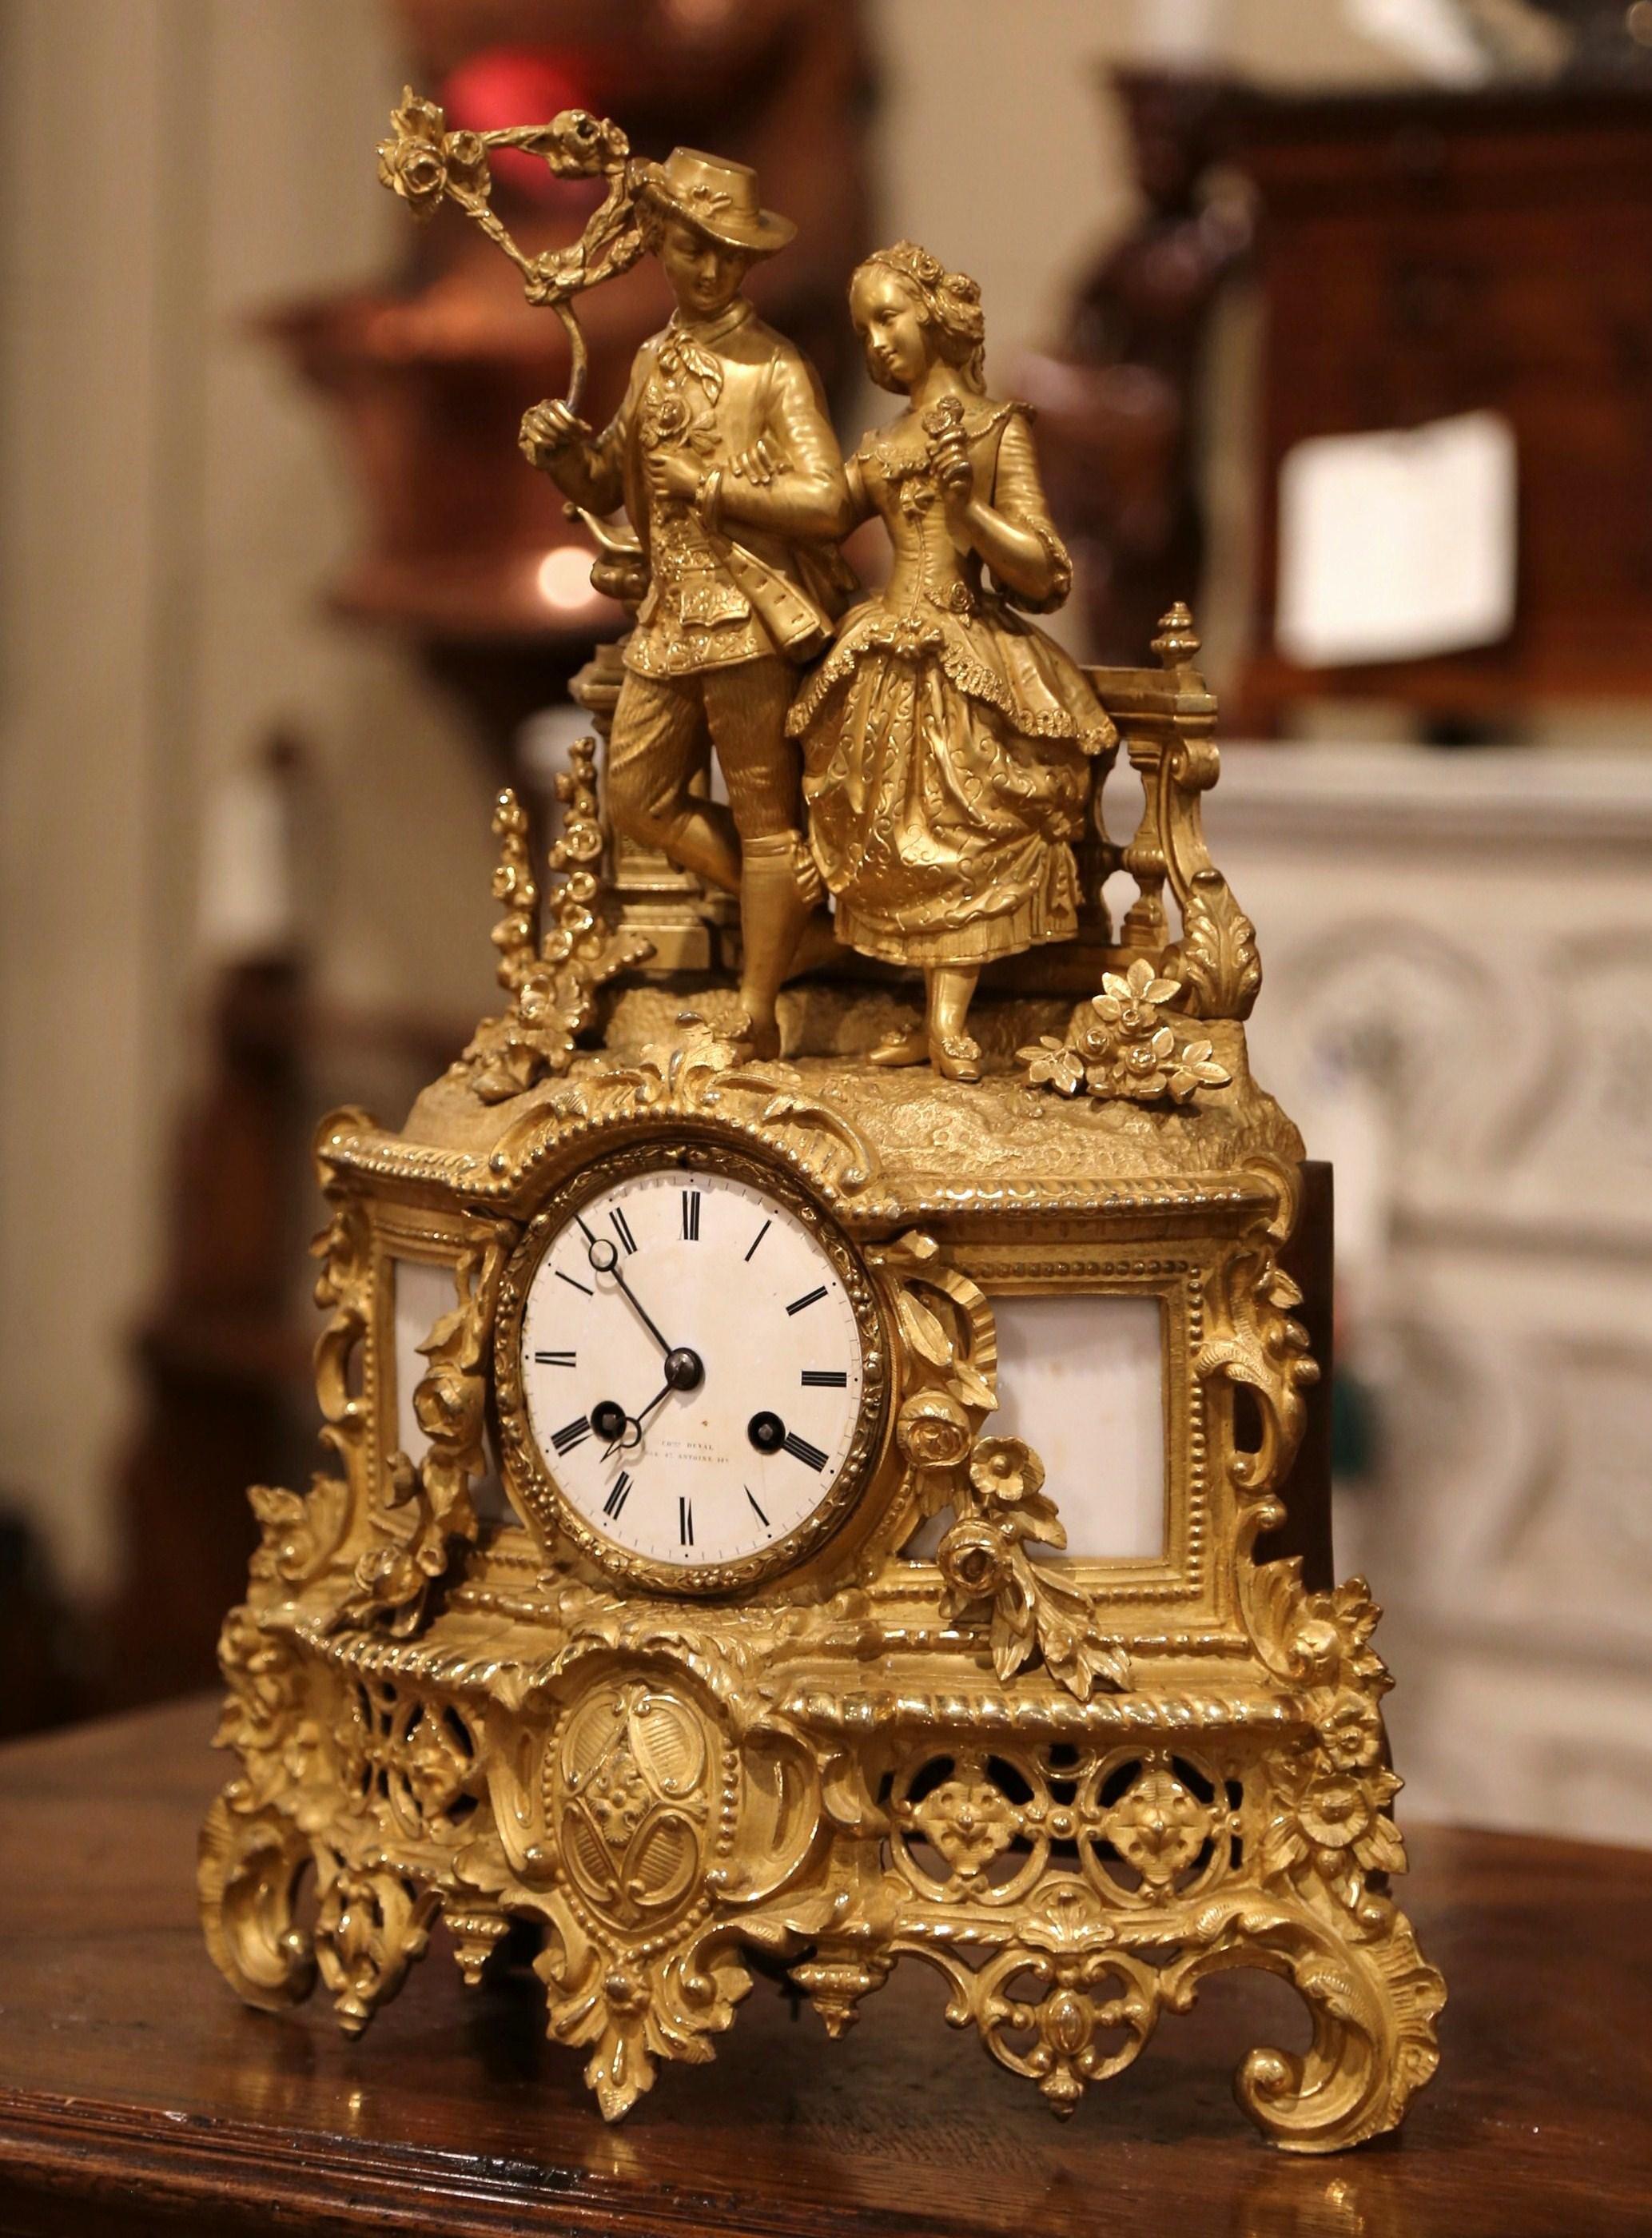 Place this elegant antique bronze and marble clock on a mantel or an office shelf. Crafted in Paris, France circa 1880, the ornate time keeper stands on scrolled feet, and features at the pediment a courting scene with a standing young man and a